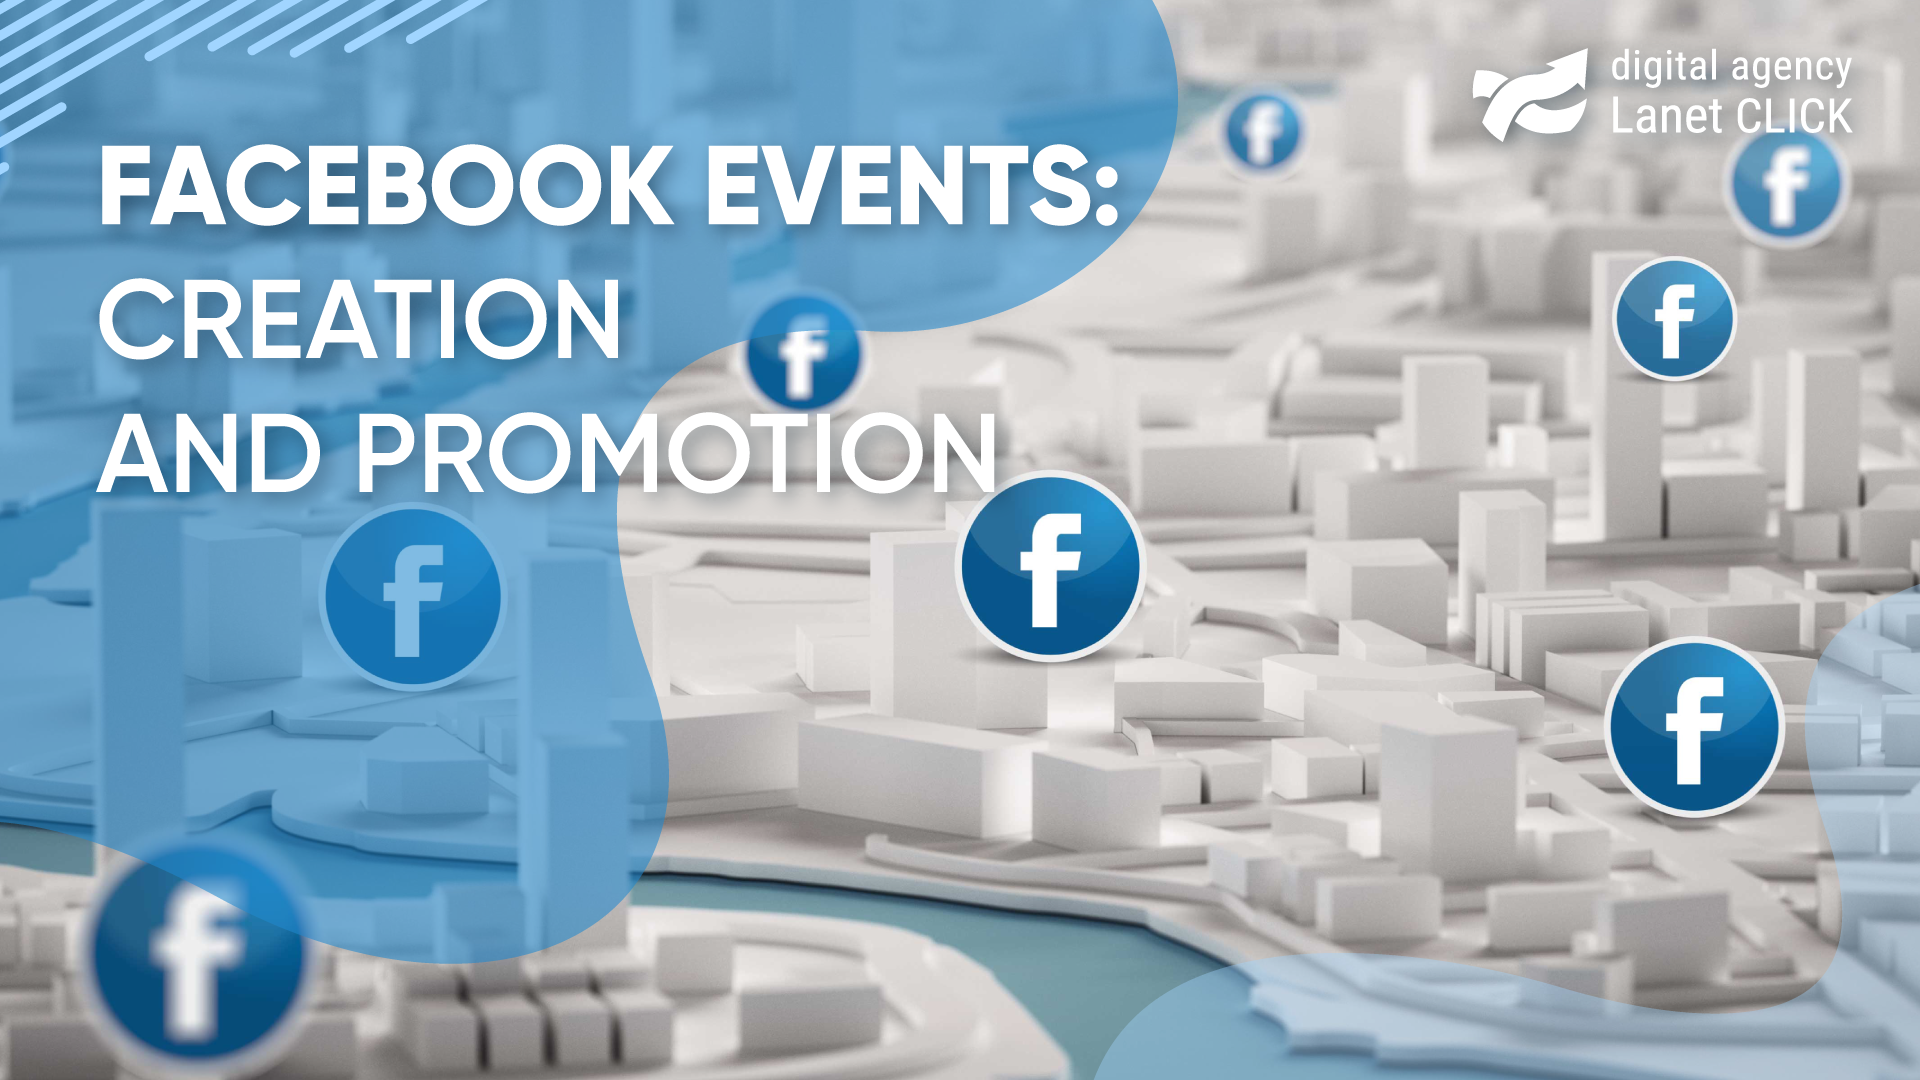 Events on Facebook: creation and promotion